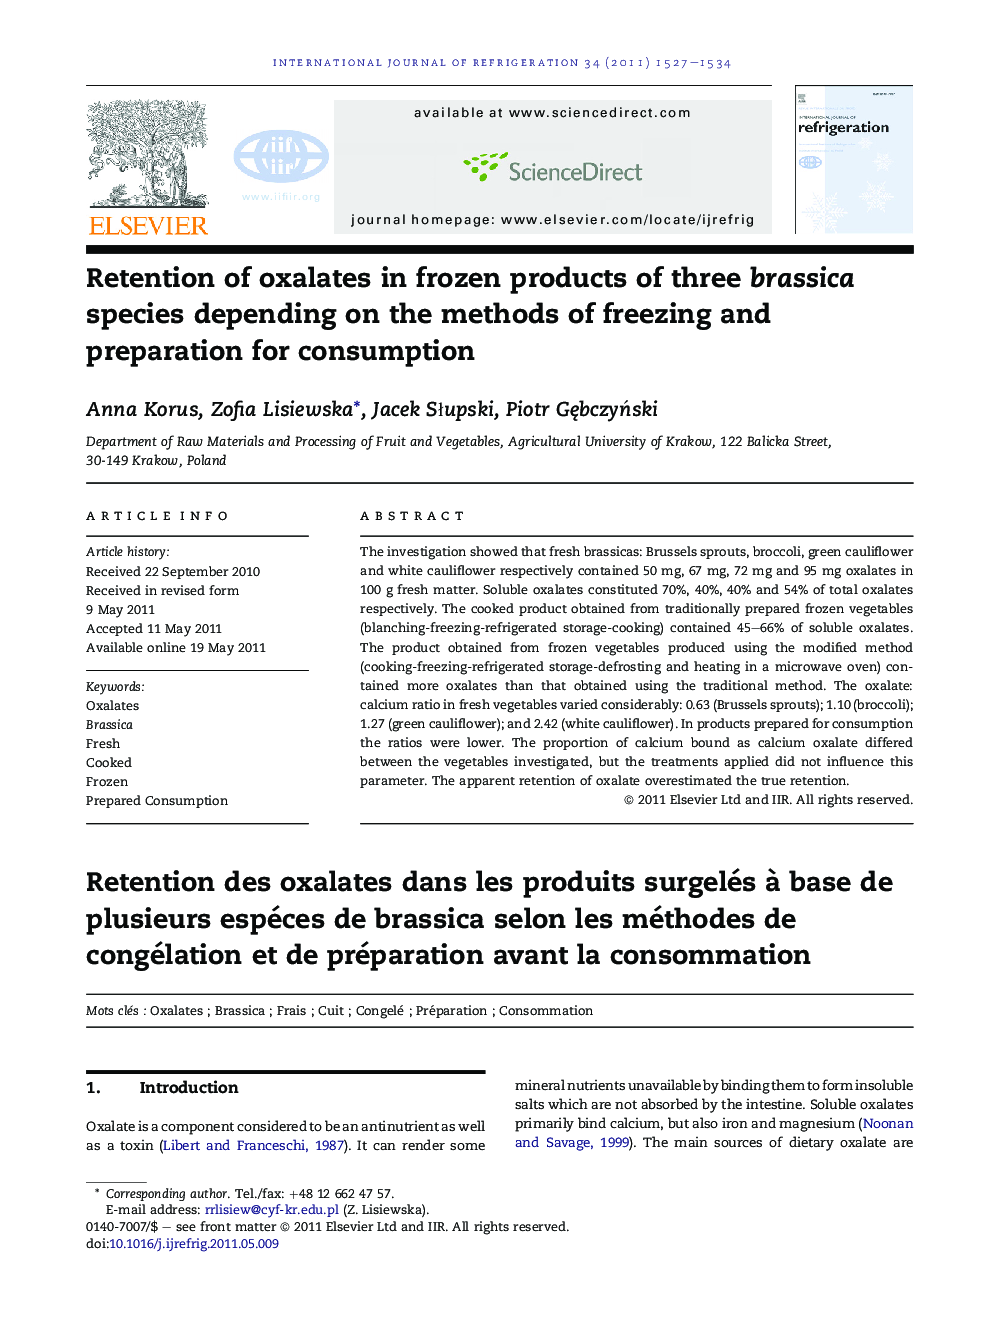 Retention of oxalates in frozen products of three brassica species depending on the methods of freezing and preparation for consumption